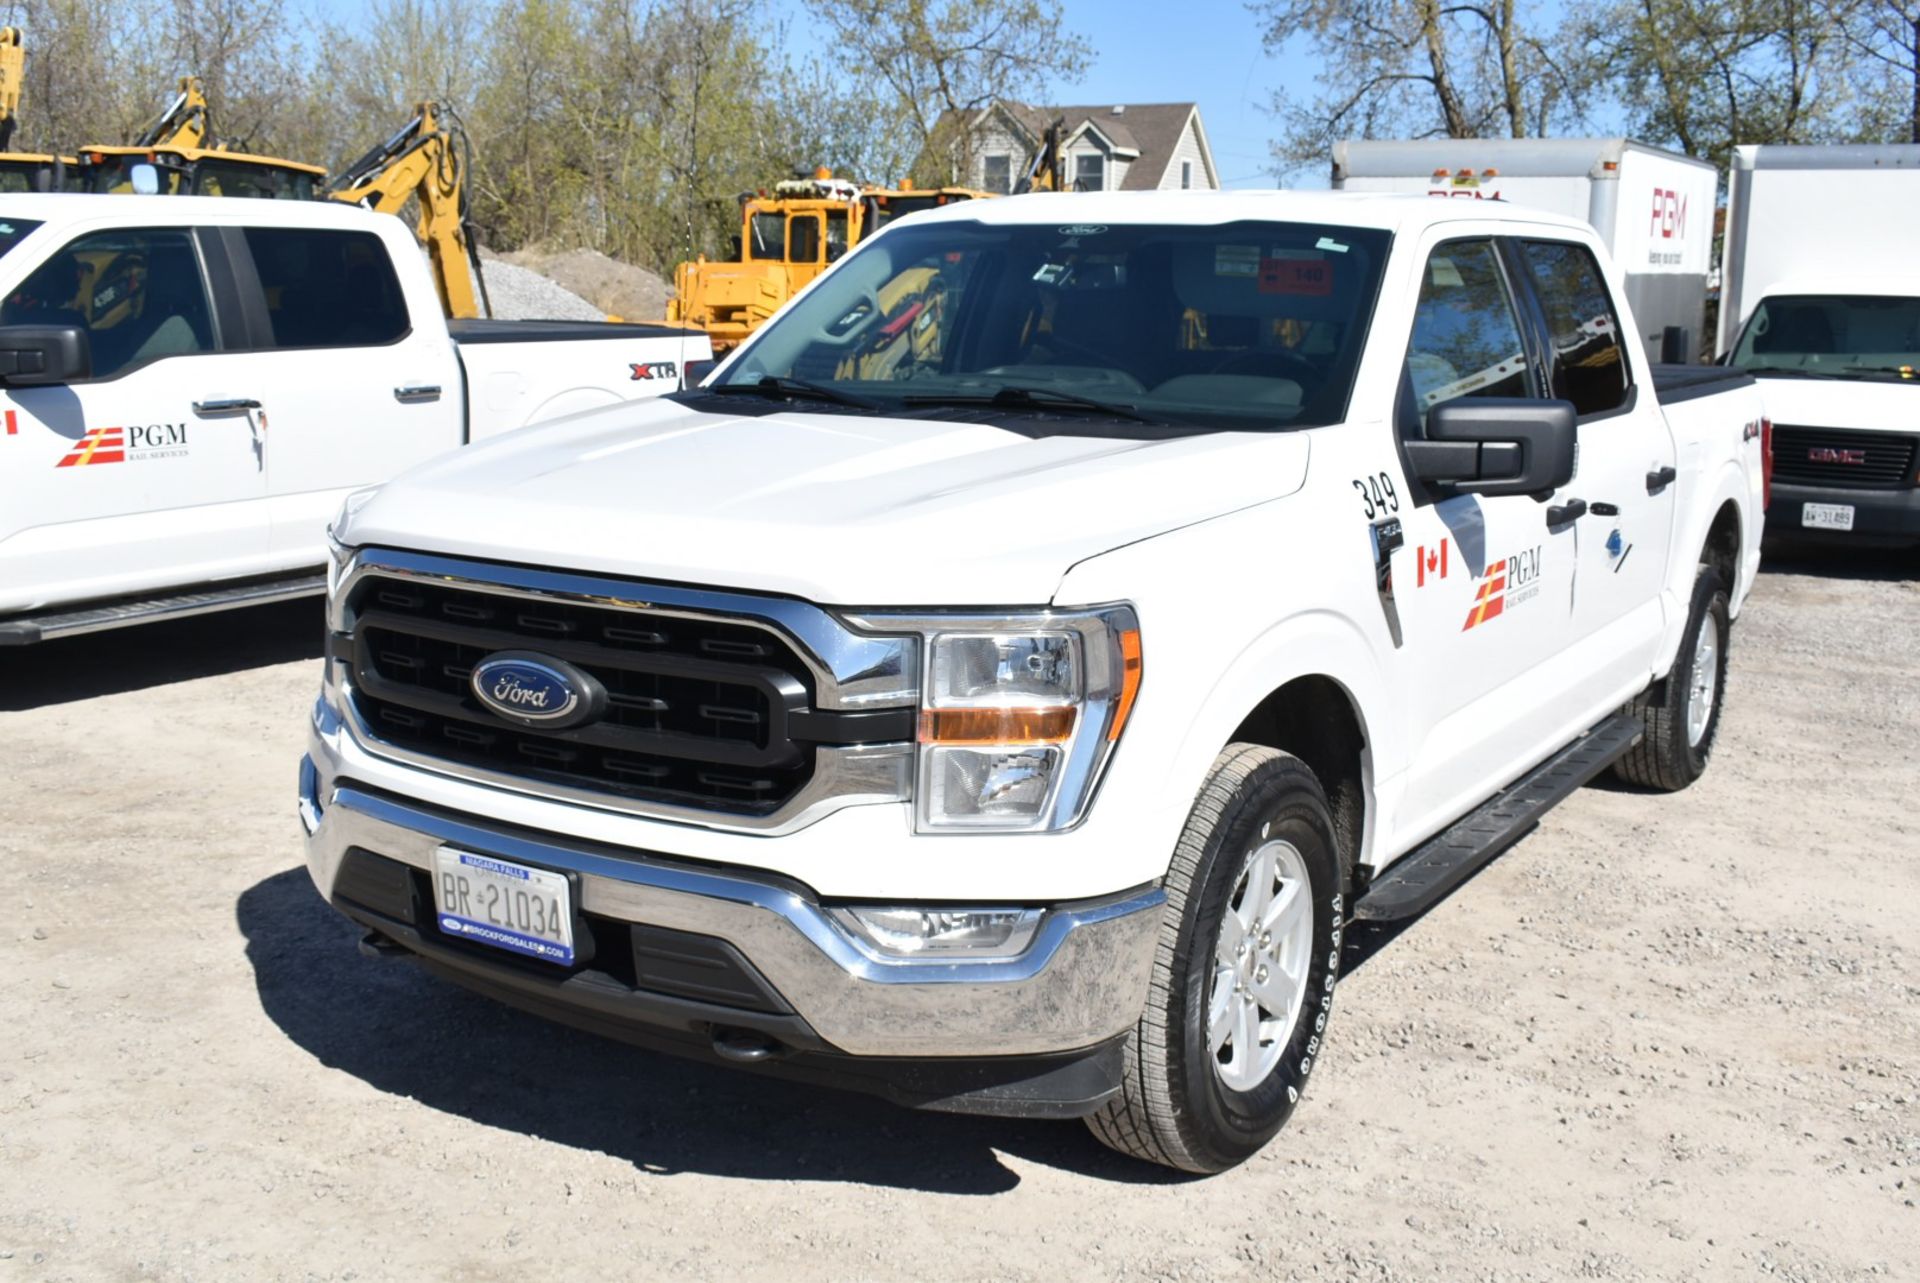 FORD (2021) F150 XLT CREW CAB PICKUP TRUCK WITH 3.5L 6 CYL. GAS ENGINE, AUTO. TRANSMISSION, 4X4,